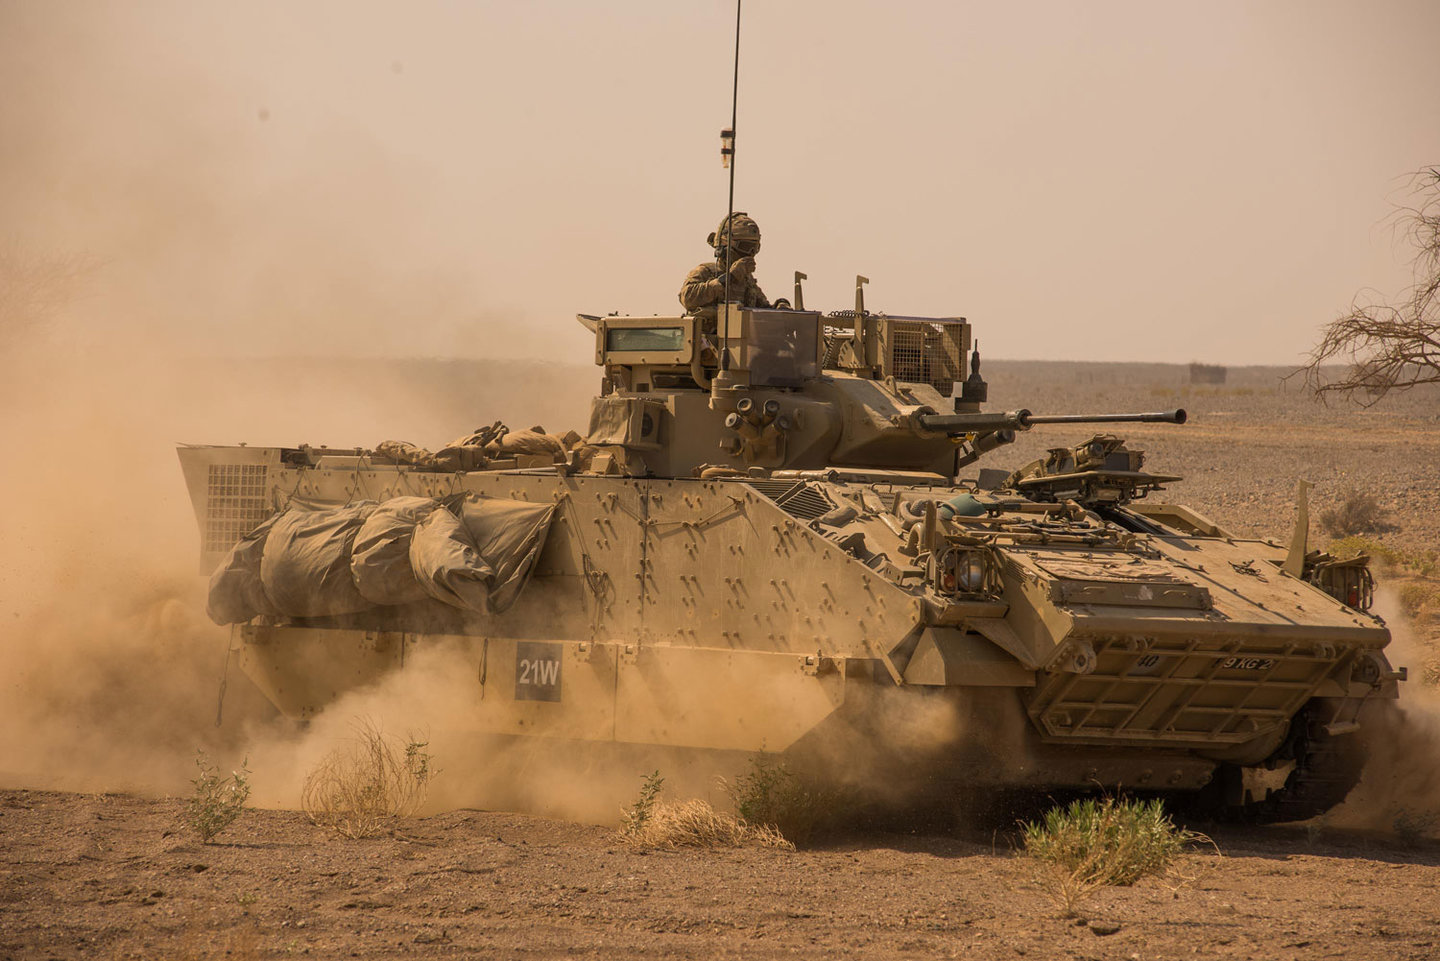 Ongoing upgrades will keep the Warrior vehicles in service until the 2040s.